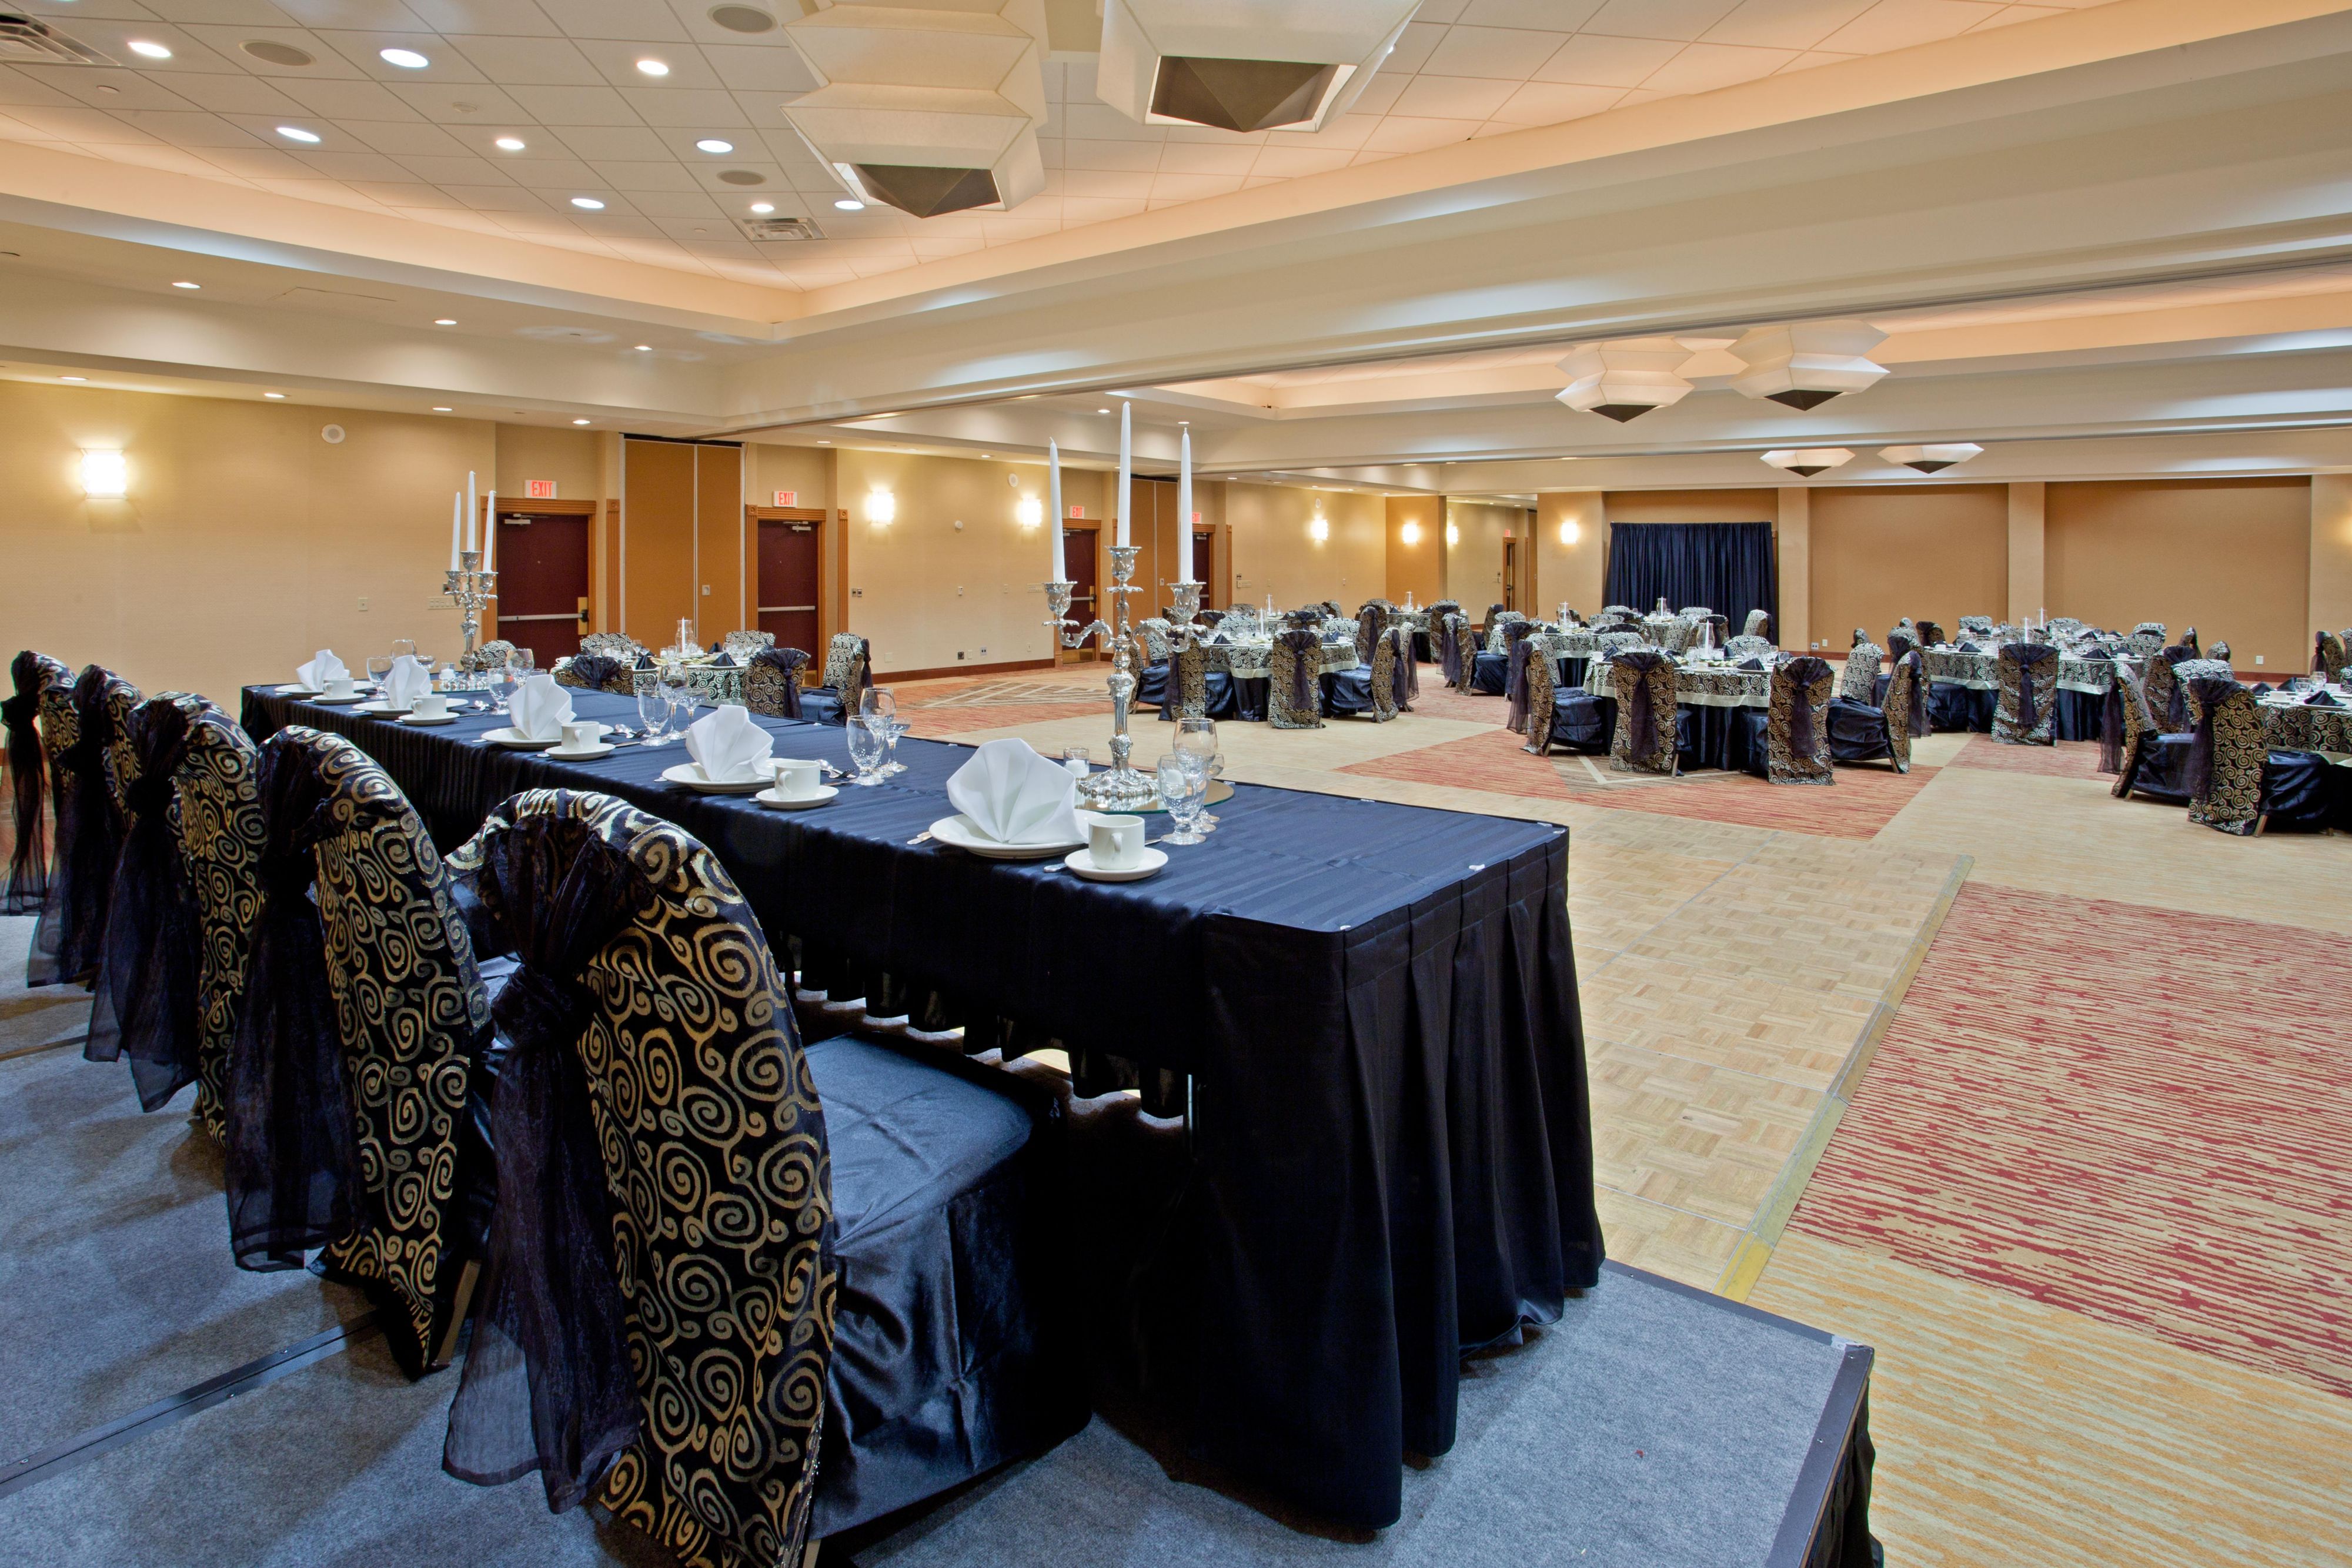 Wow your guests with a stunning event in our ballroom.